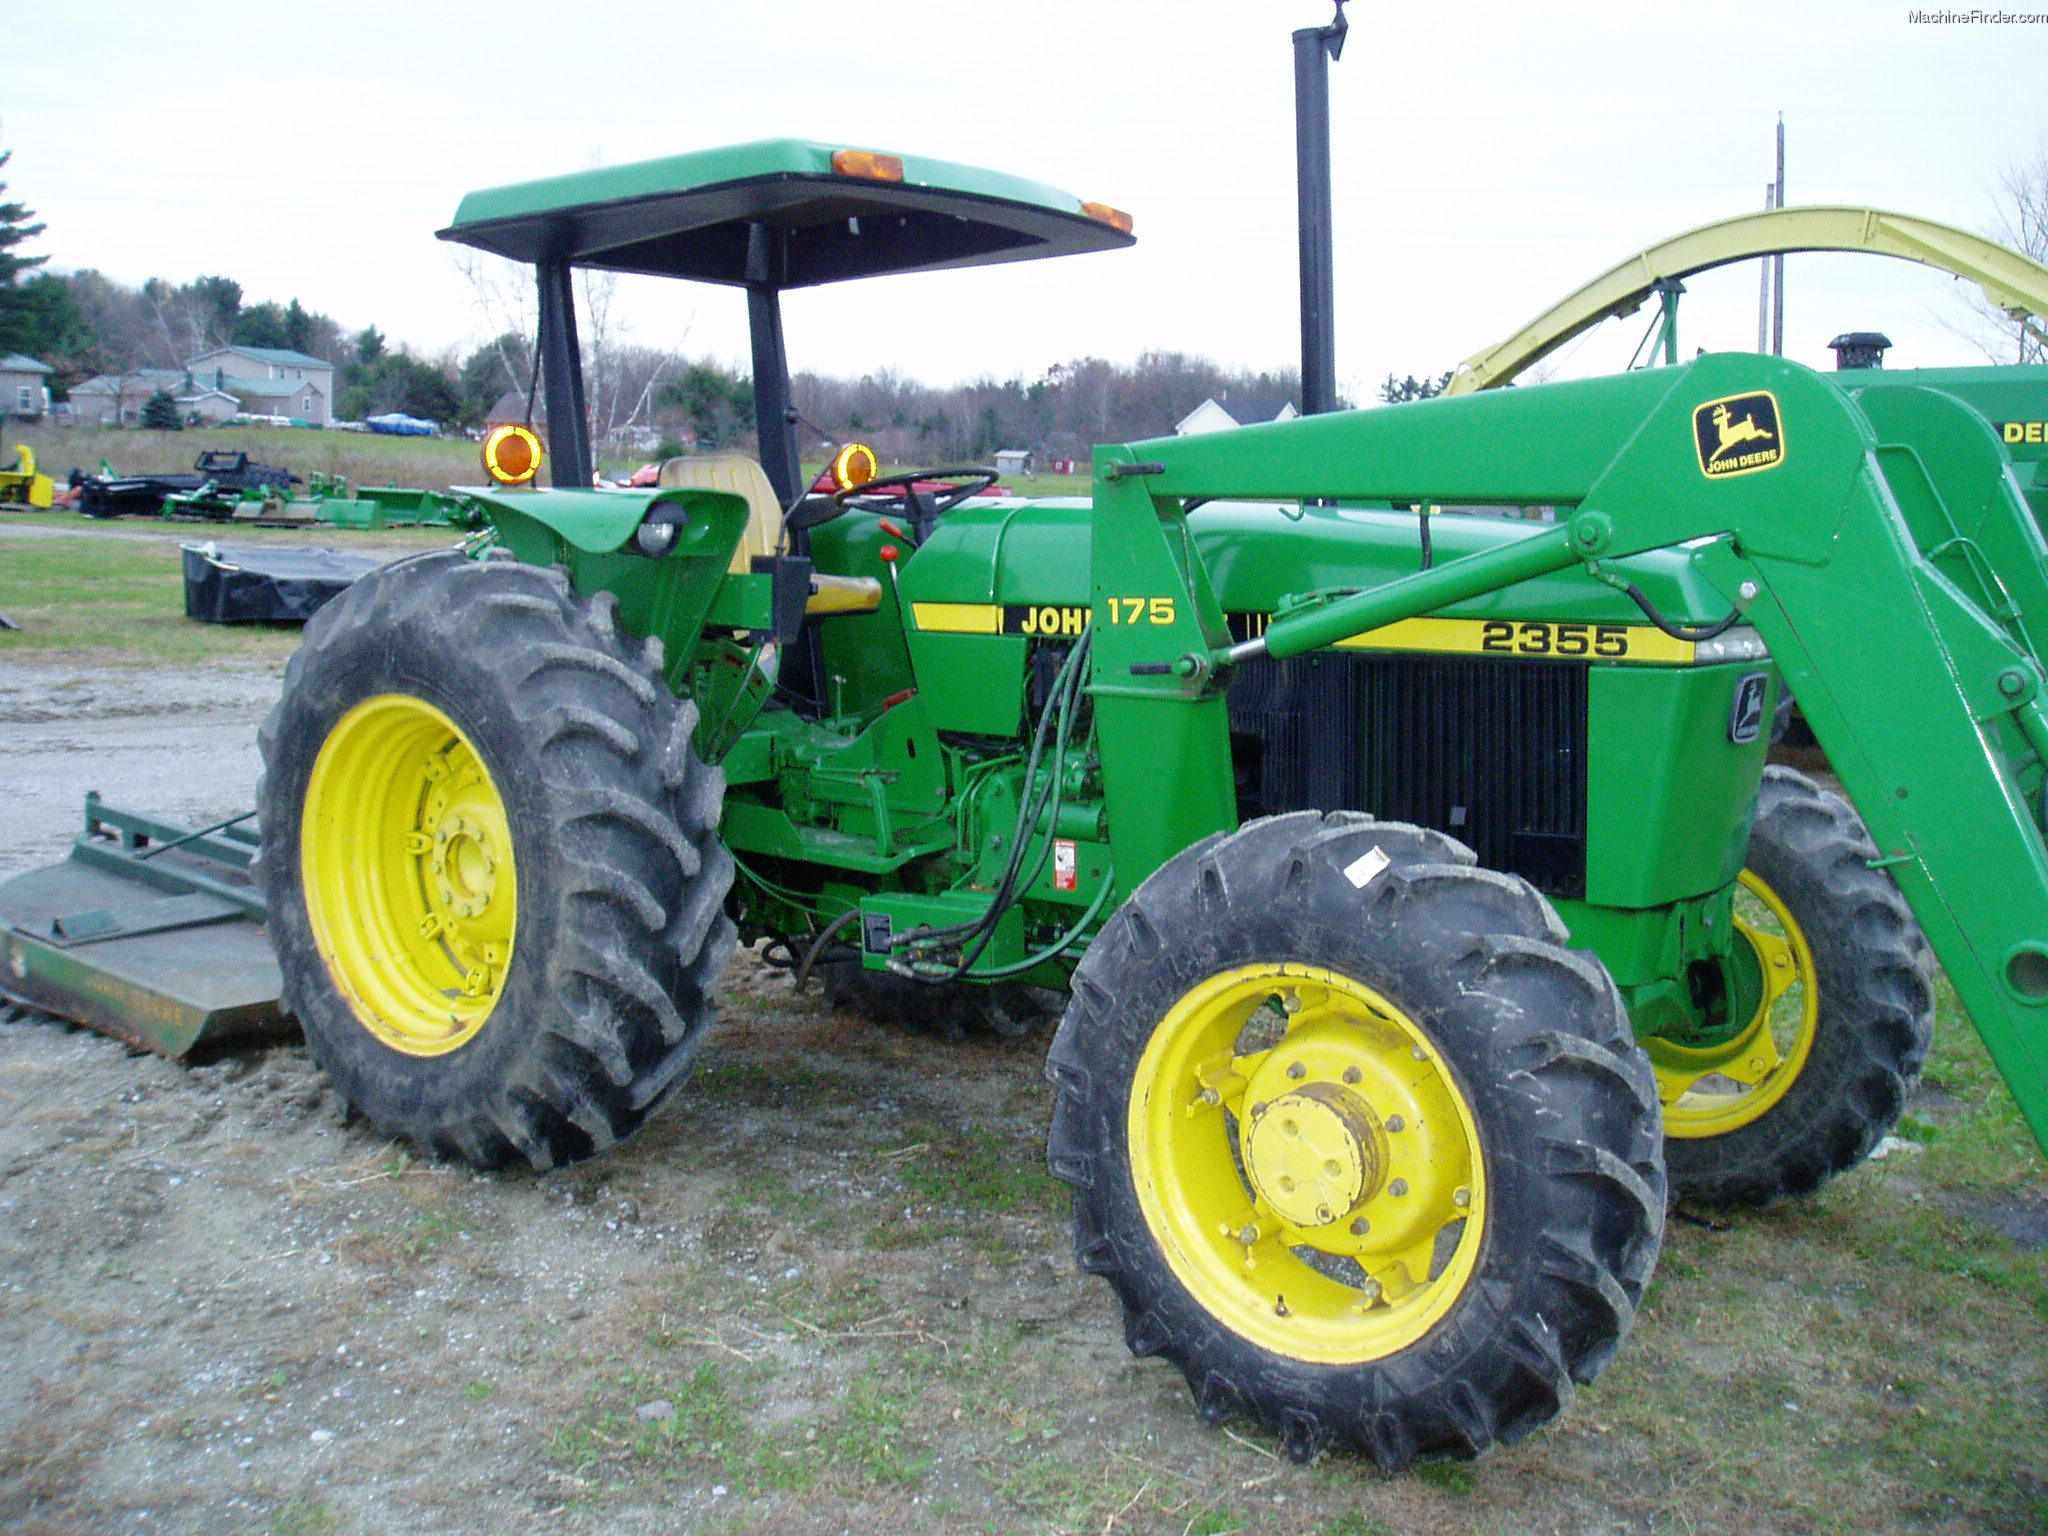 John Deere 2355 Tractor Parts Pictures to pin on Pinterest